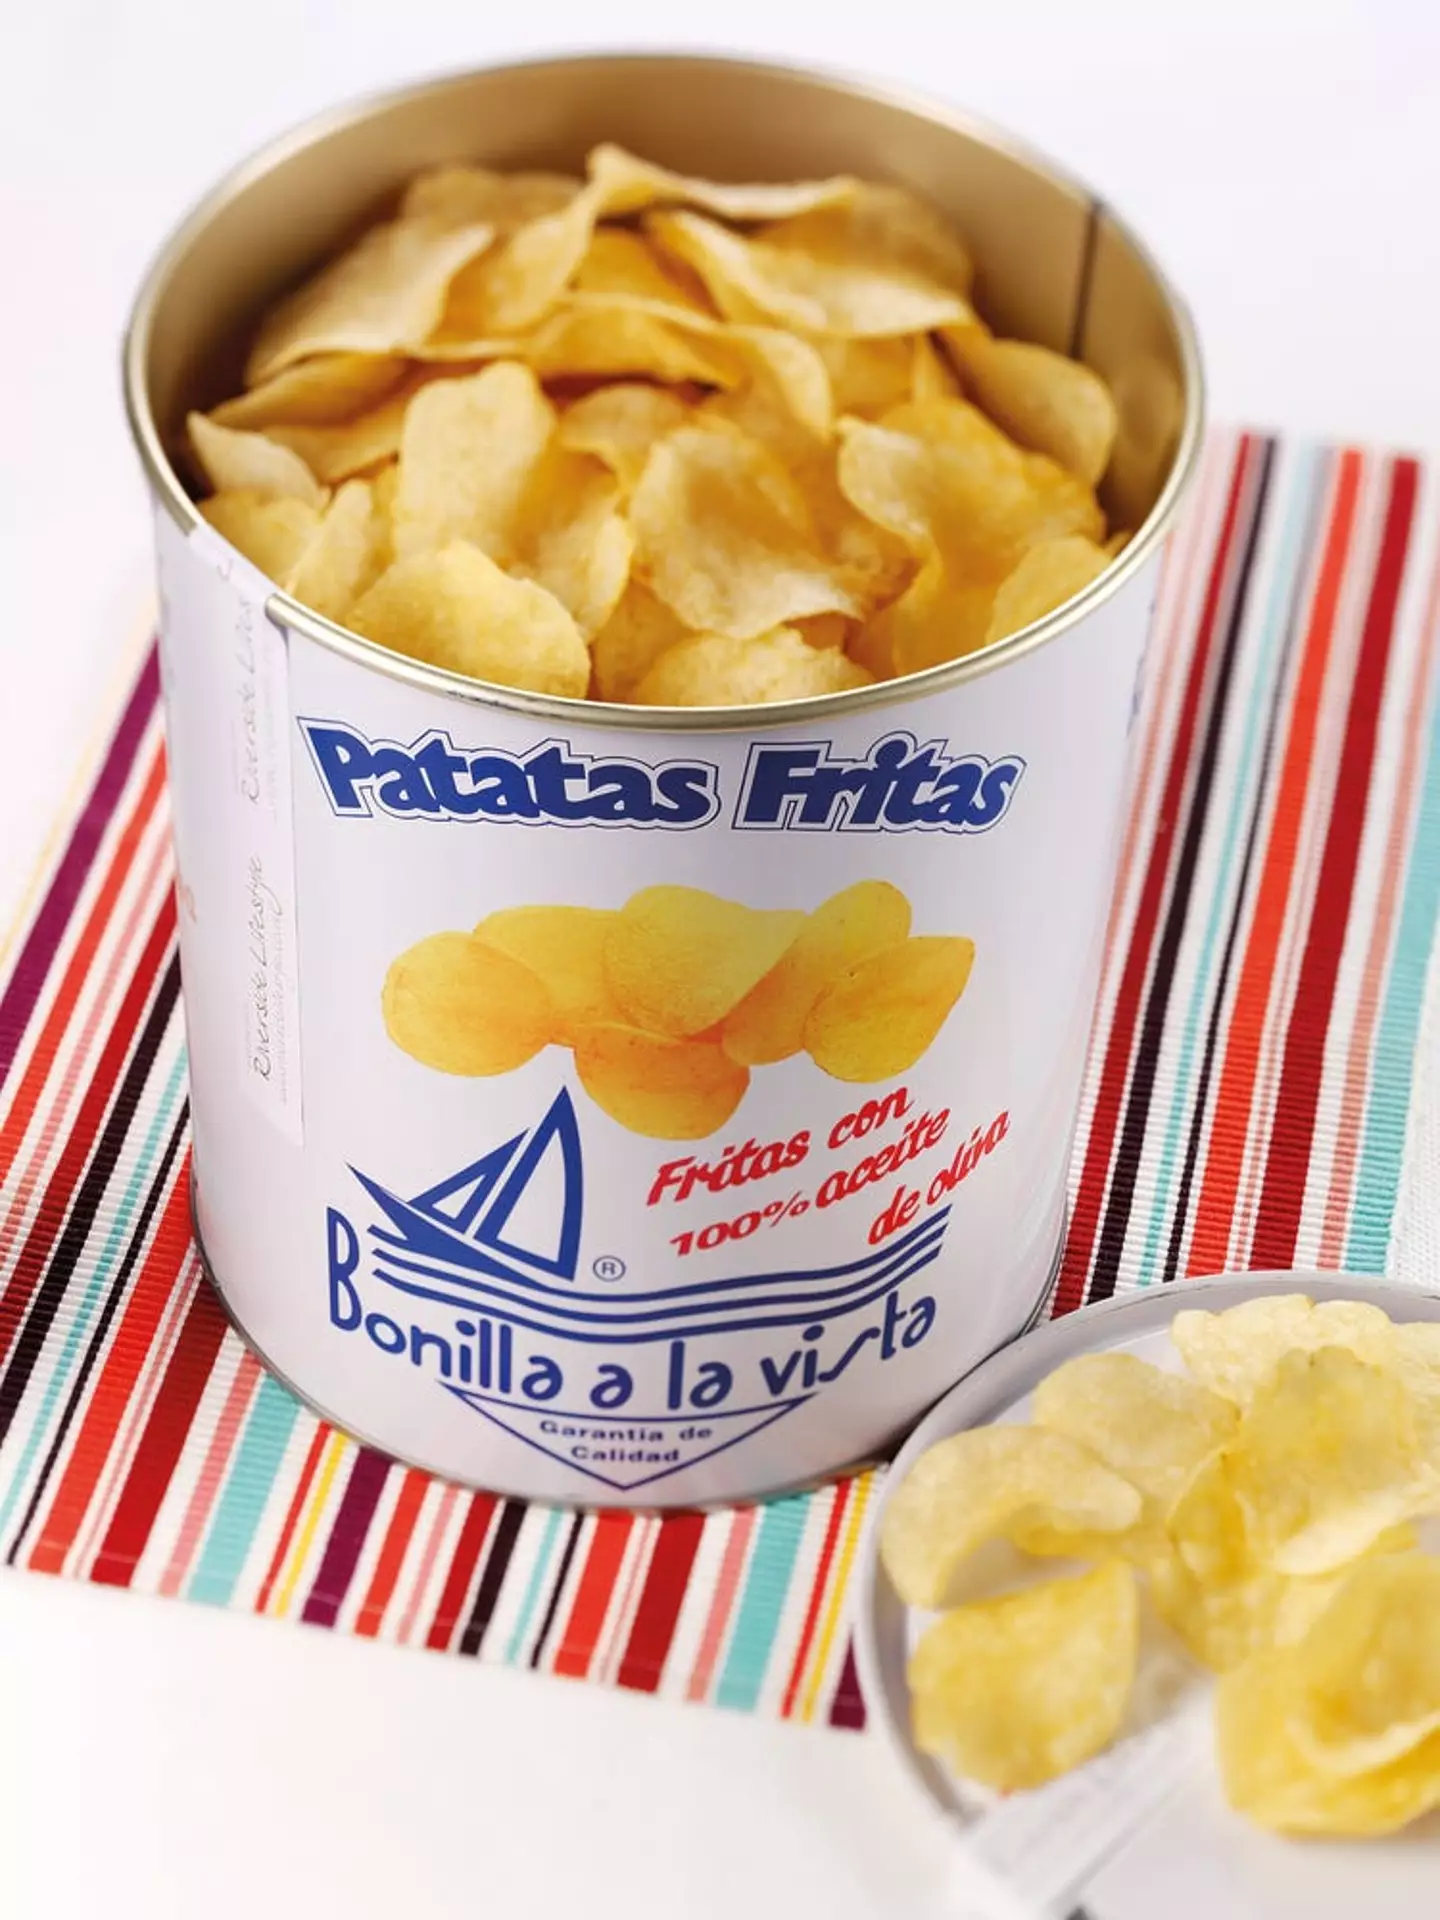 The crisps have been made in Spain for 80 years (